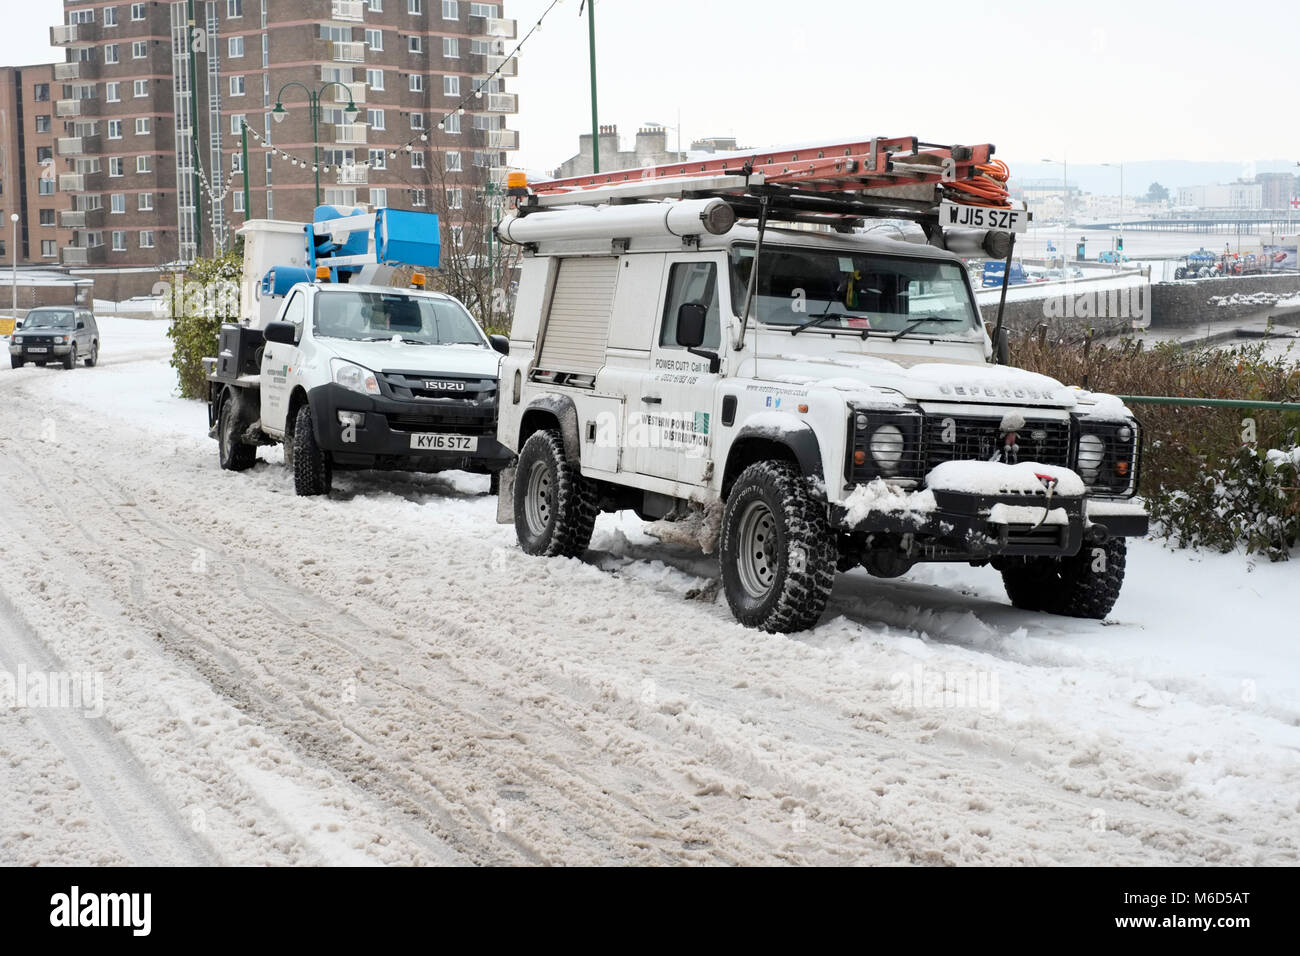 Weston super mare. UK. 2nd March, 2018.A  four wheel drive vehicle belonging to Western power disribution, parked ready to deal with power supply issues caused by heavey snow the night before. Credit: Alamy Live News Stock Photo